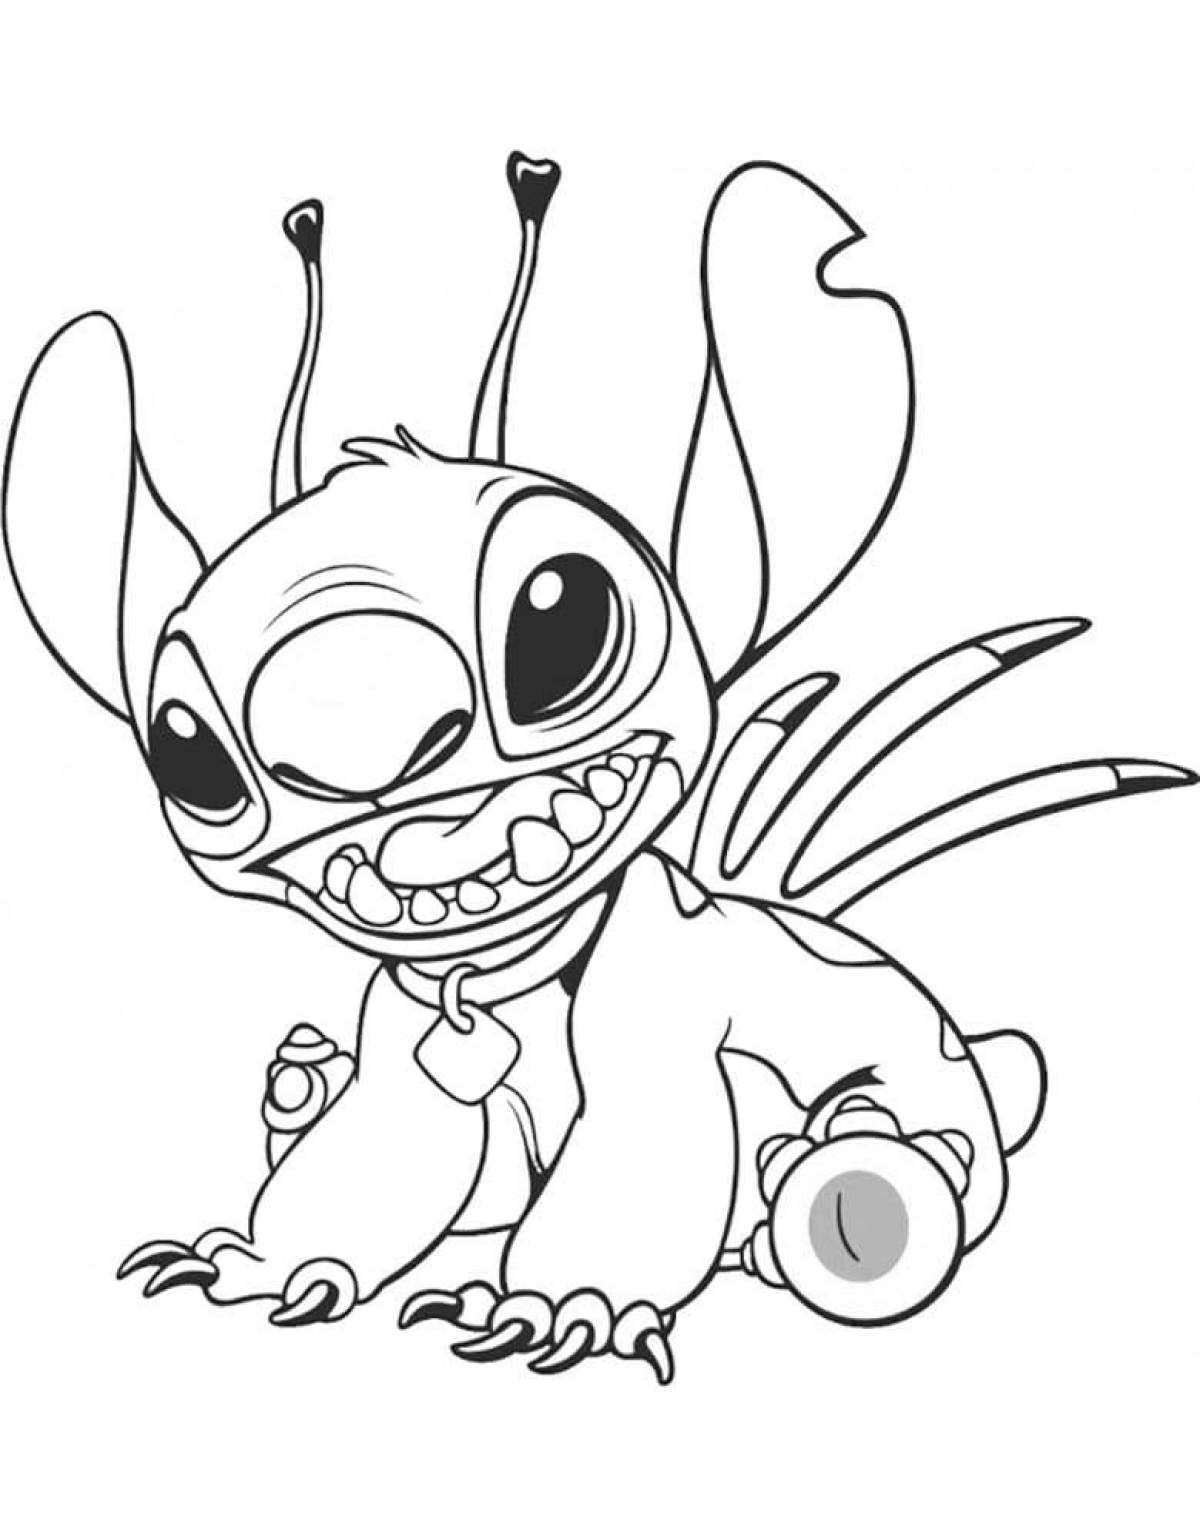 Radiant coloring page stitch